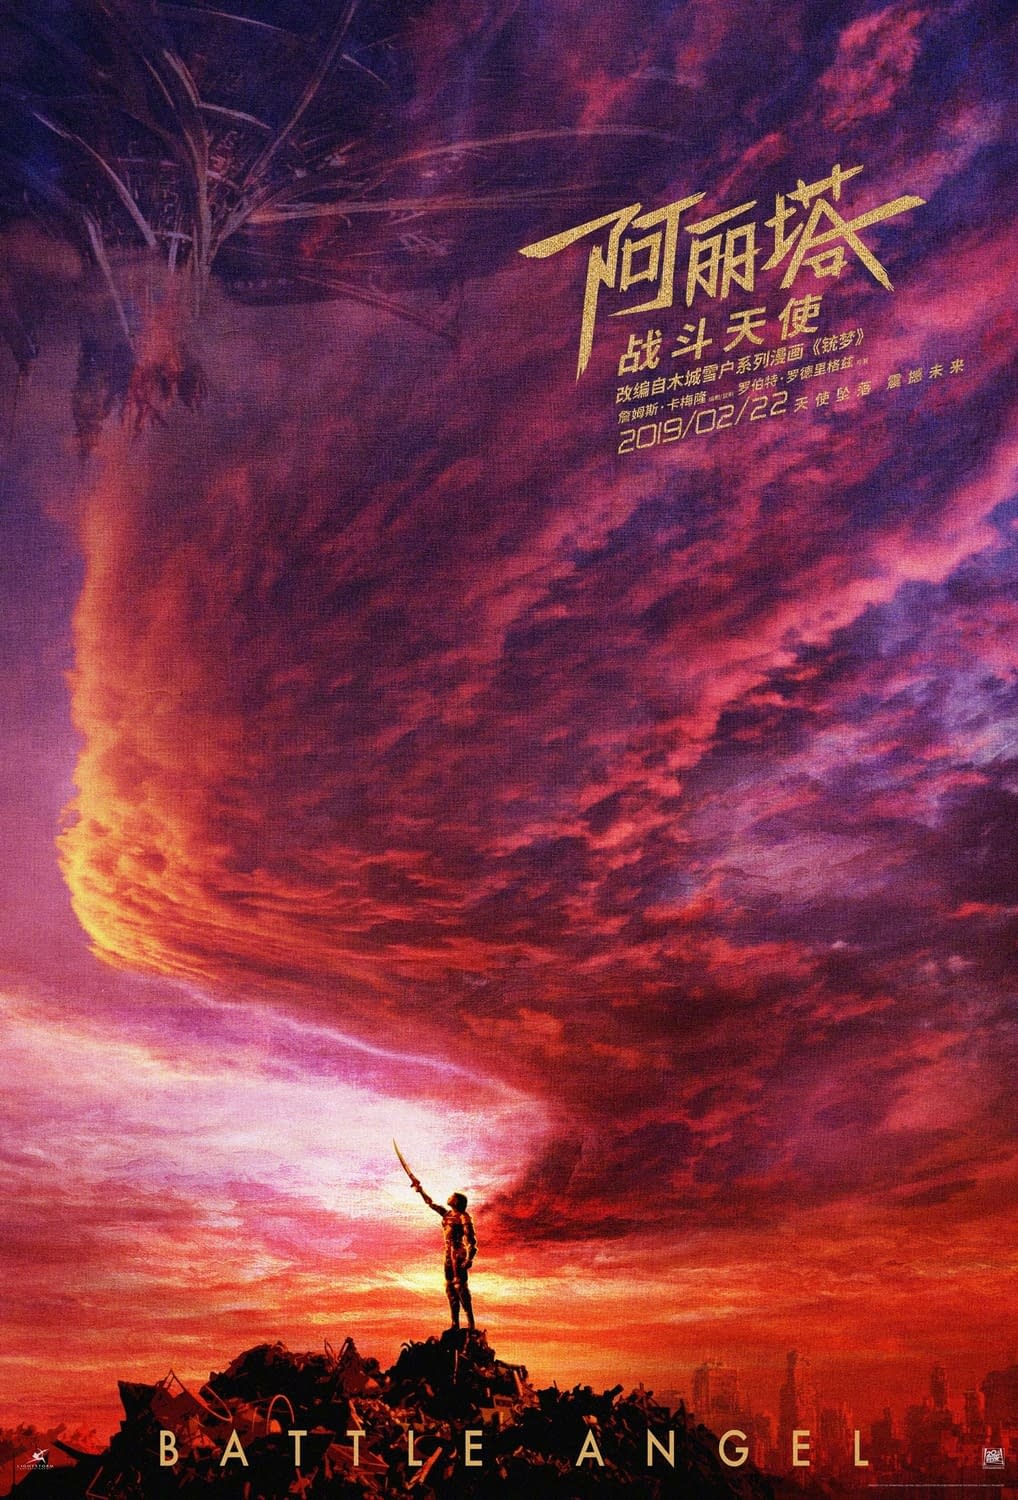 This New Chinese Poster for Alita: Battle Angel is Gorgeous